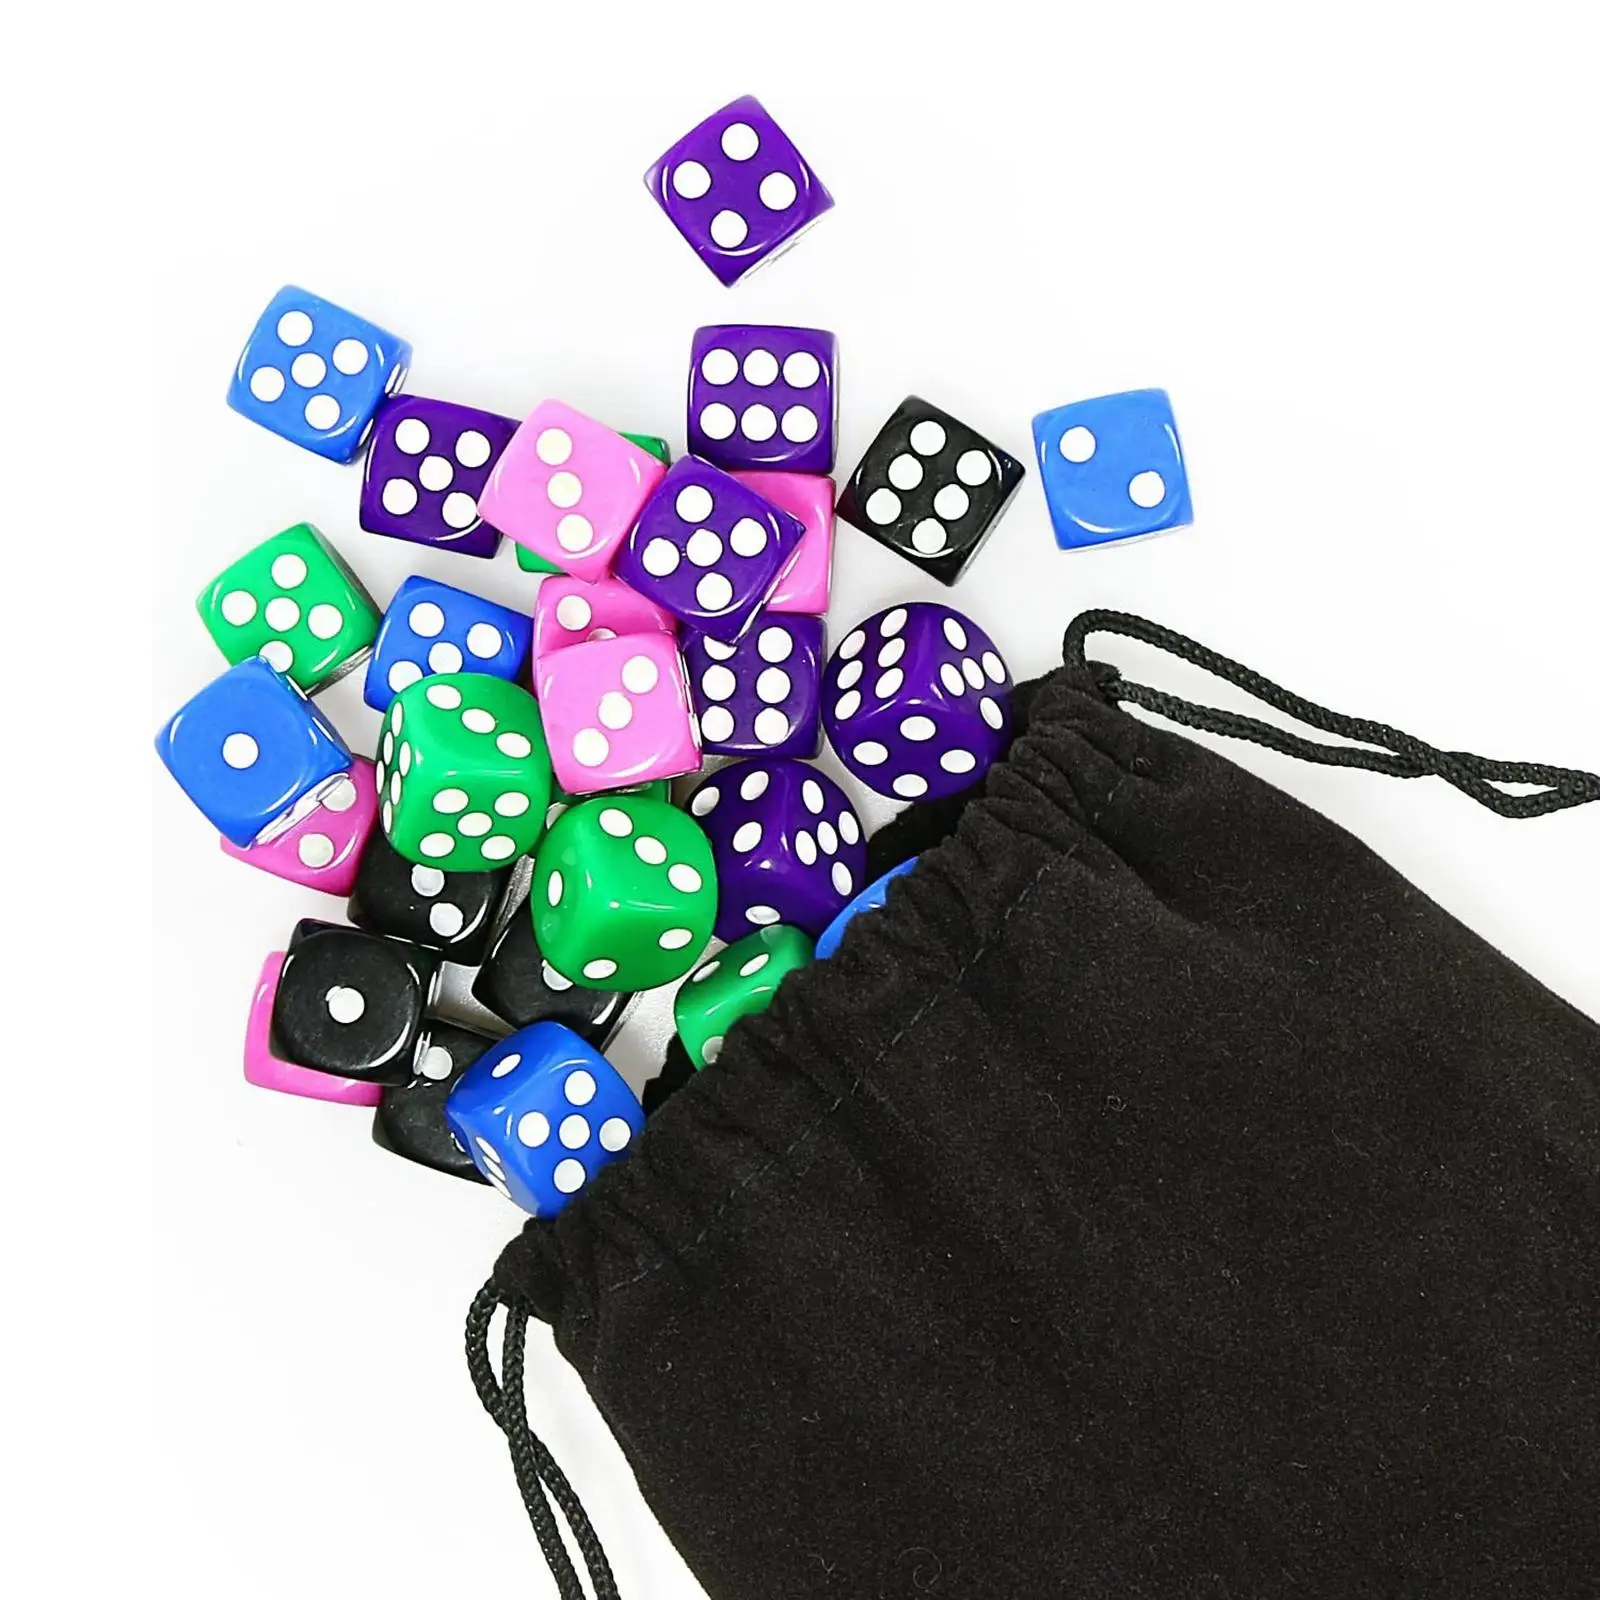 50 Pieces Six Sided Dices Set with Drawstring Dice Bag for MTG RPG Party Toys 16mm Acrylic Dice Table Borad Games Math Teaching